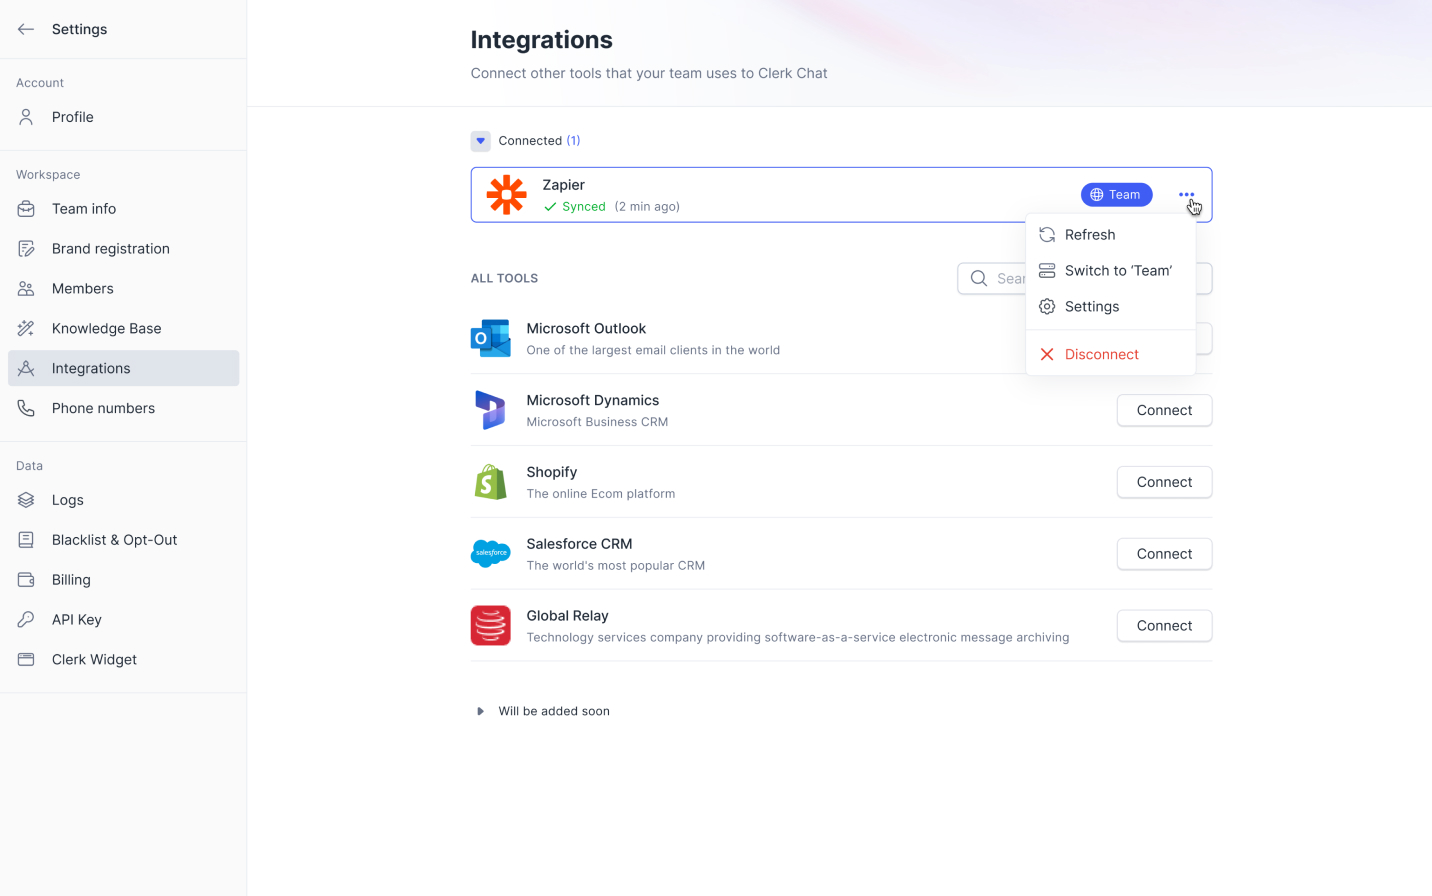 Integrate with thousands of apps